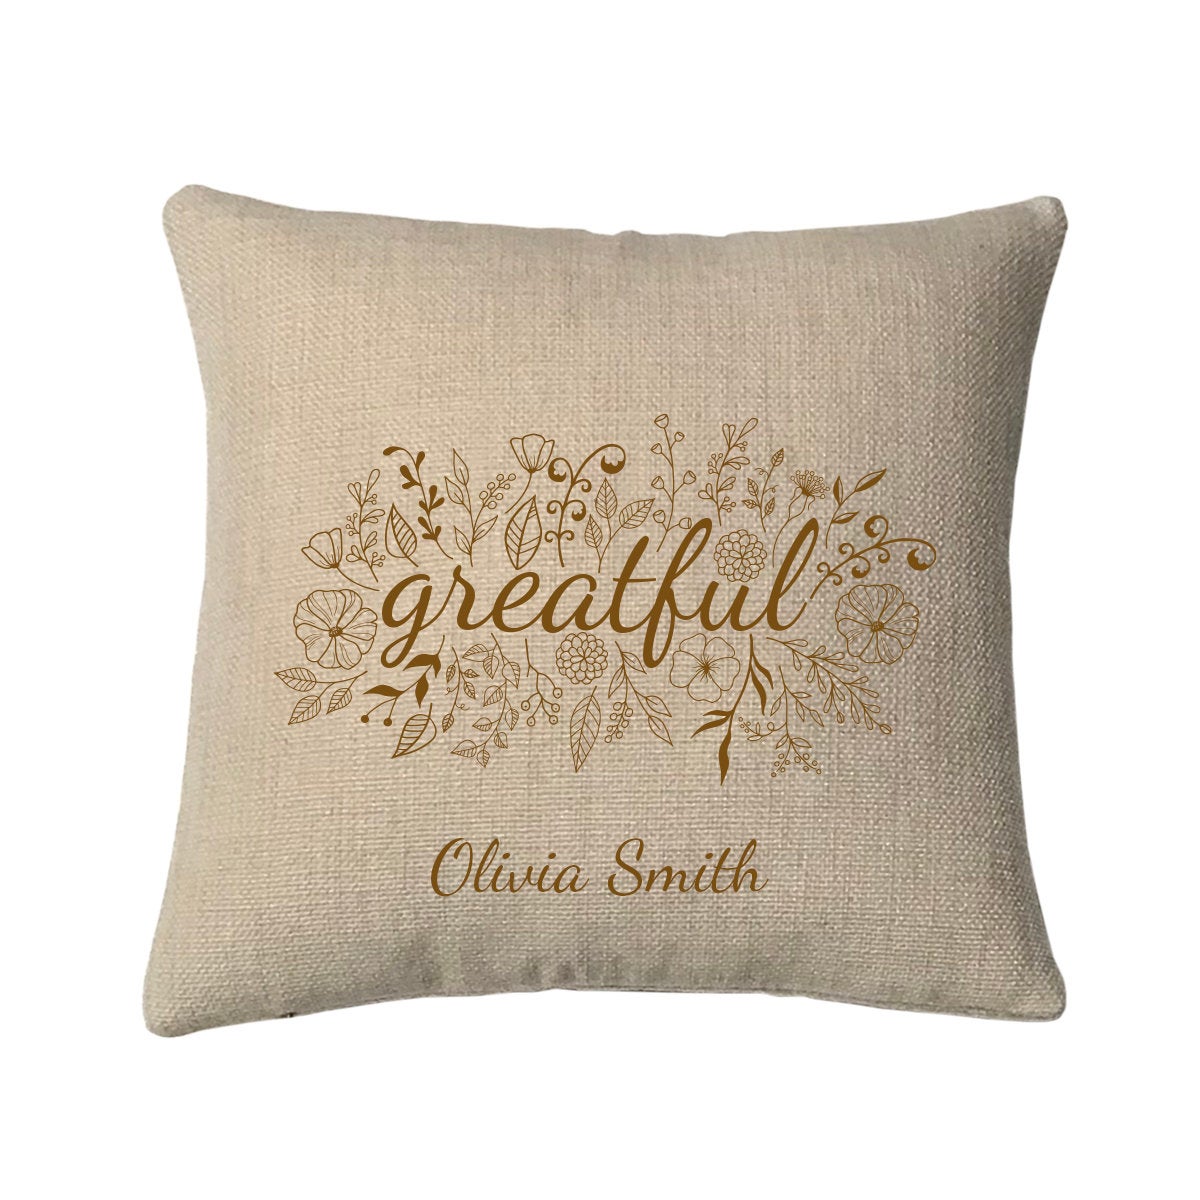 Personalized Greatful Mini Throw Pillow Measures 9.5 Inches X 9.5 Inches (Insert is included) Complete Very Small Throw Pillow